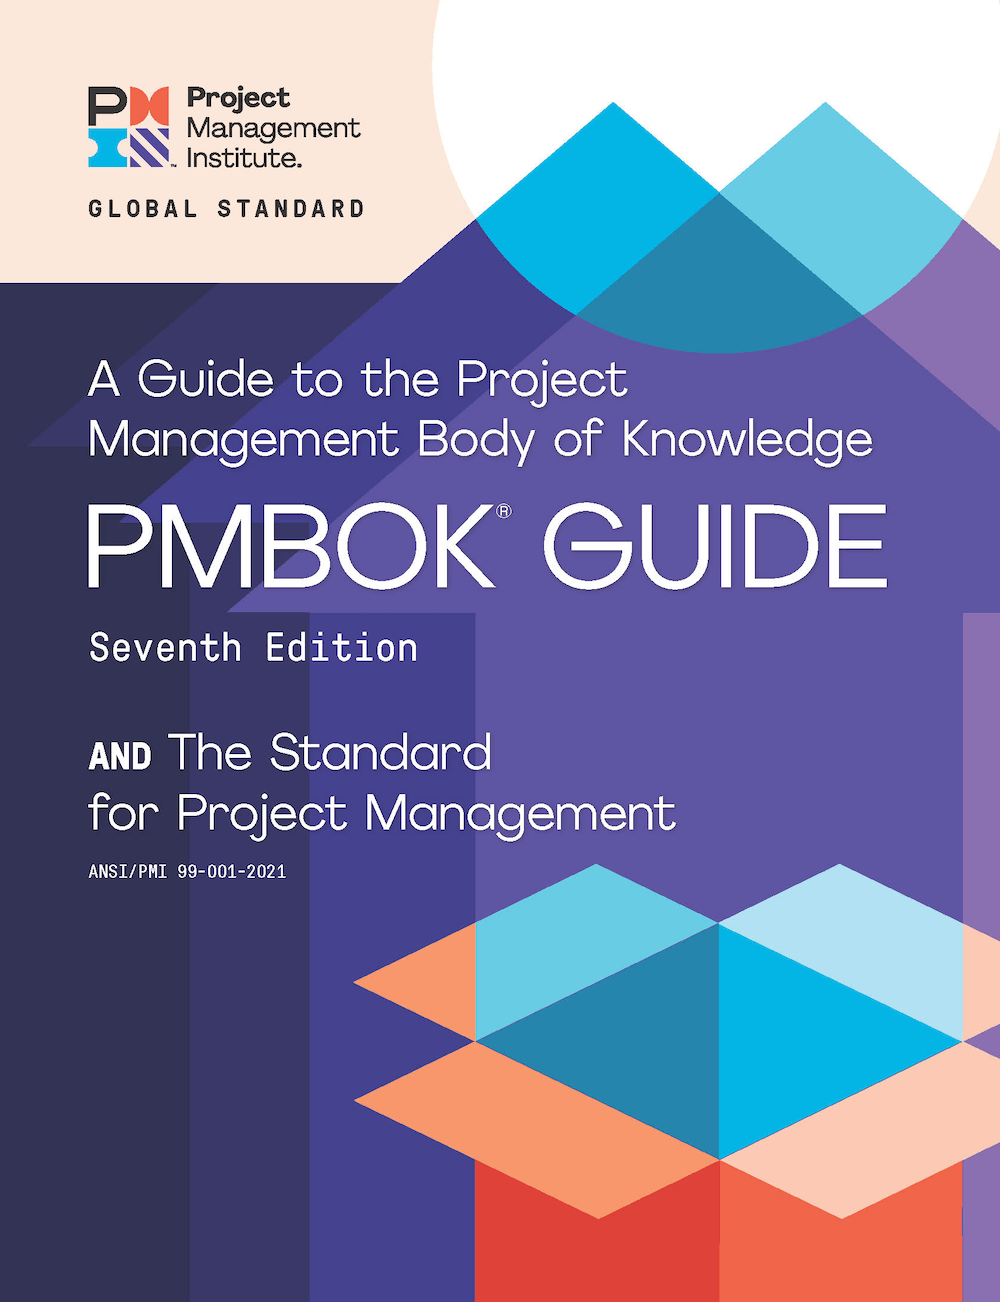 PMBOK Guide 7th Edition PDF Download for PMP and CAPM Certification